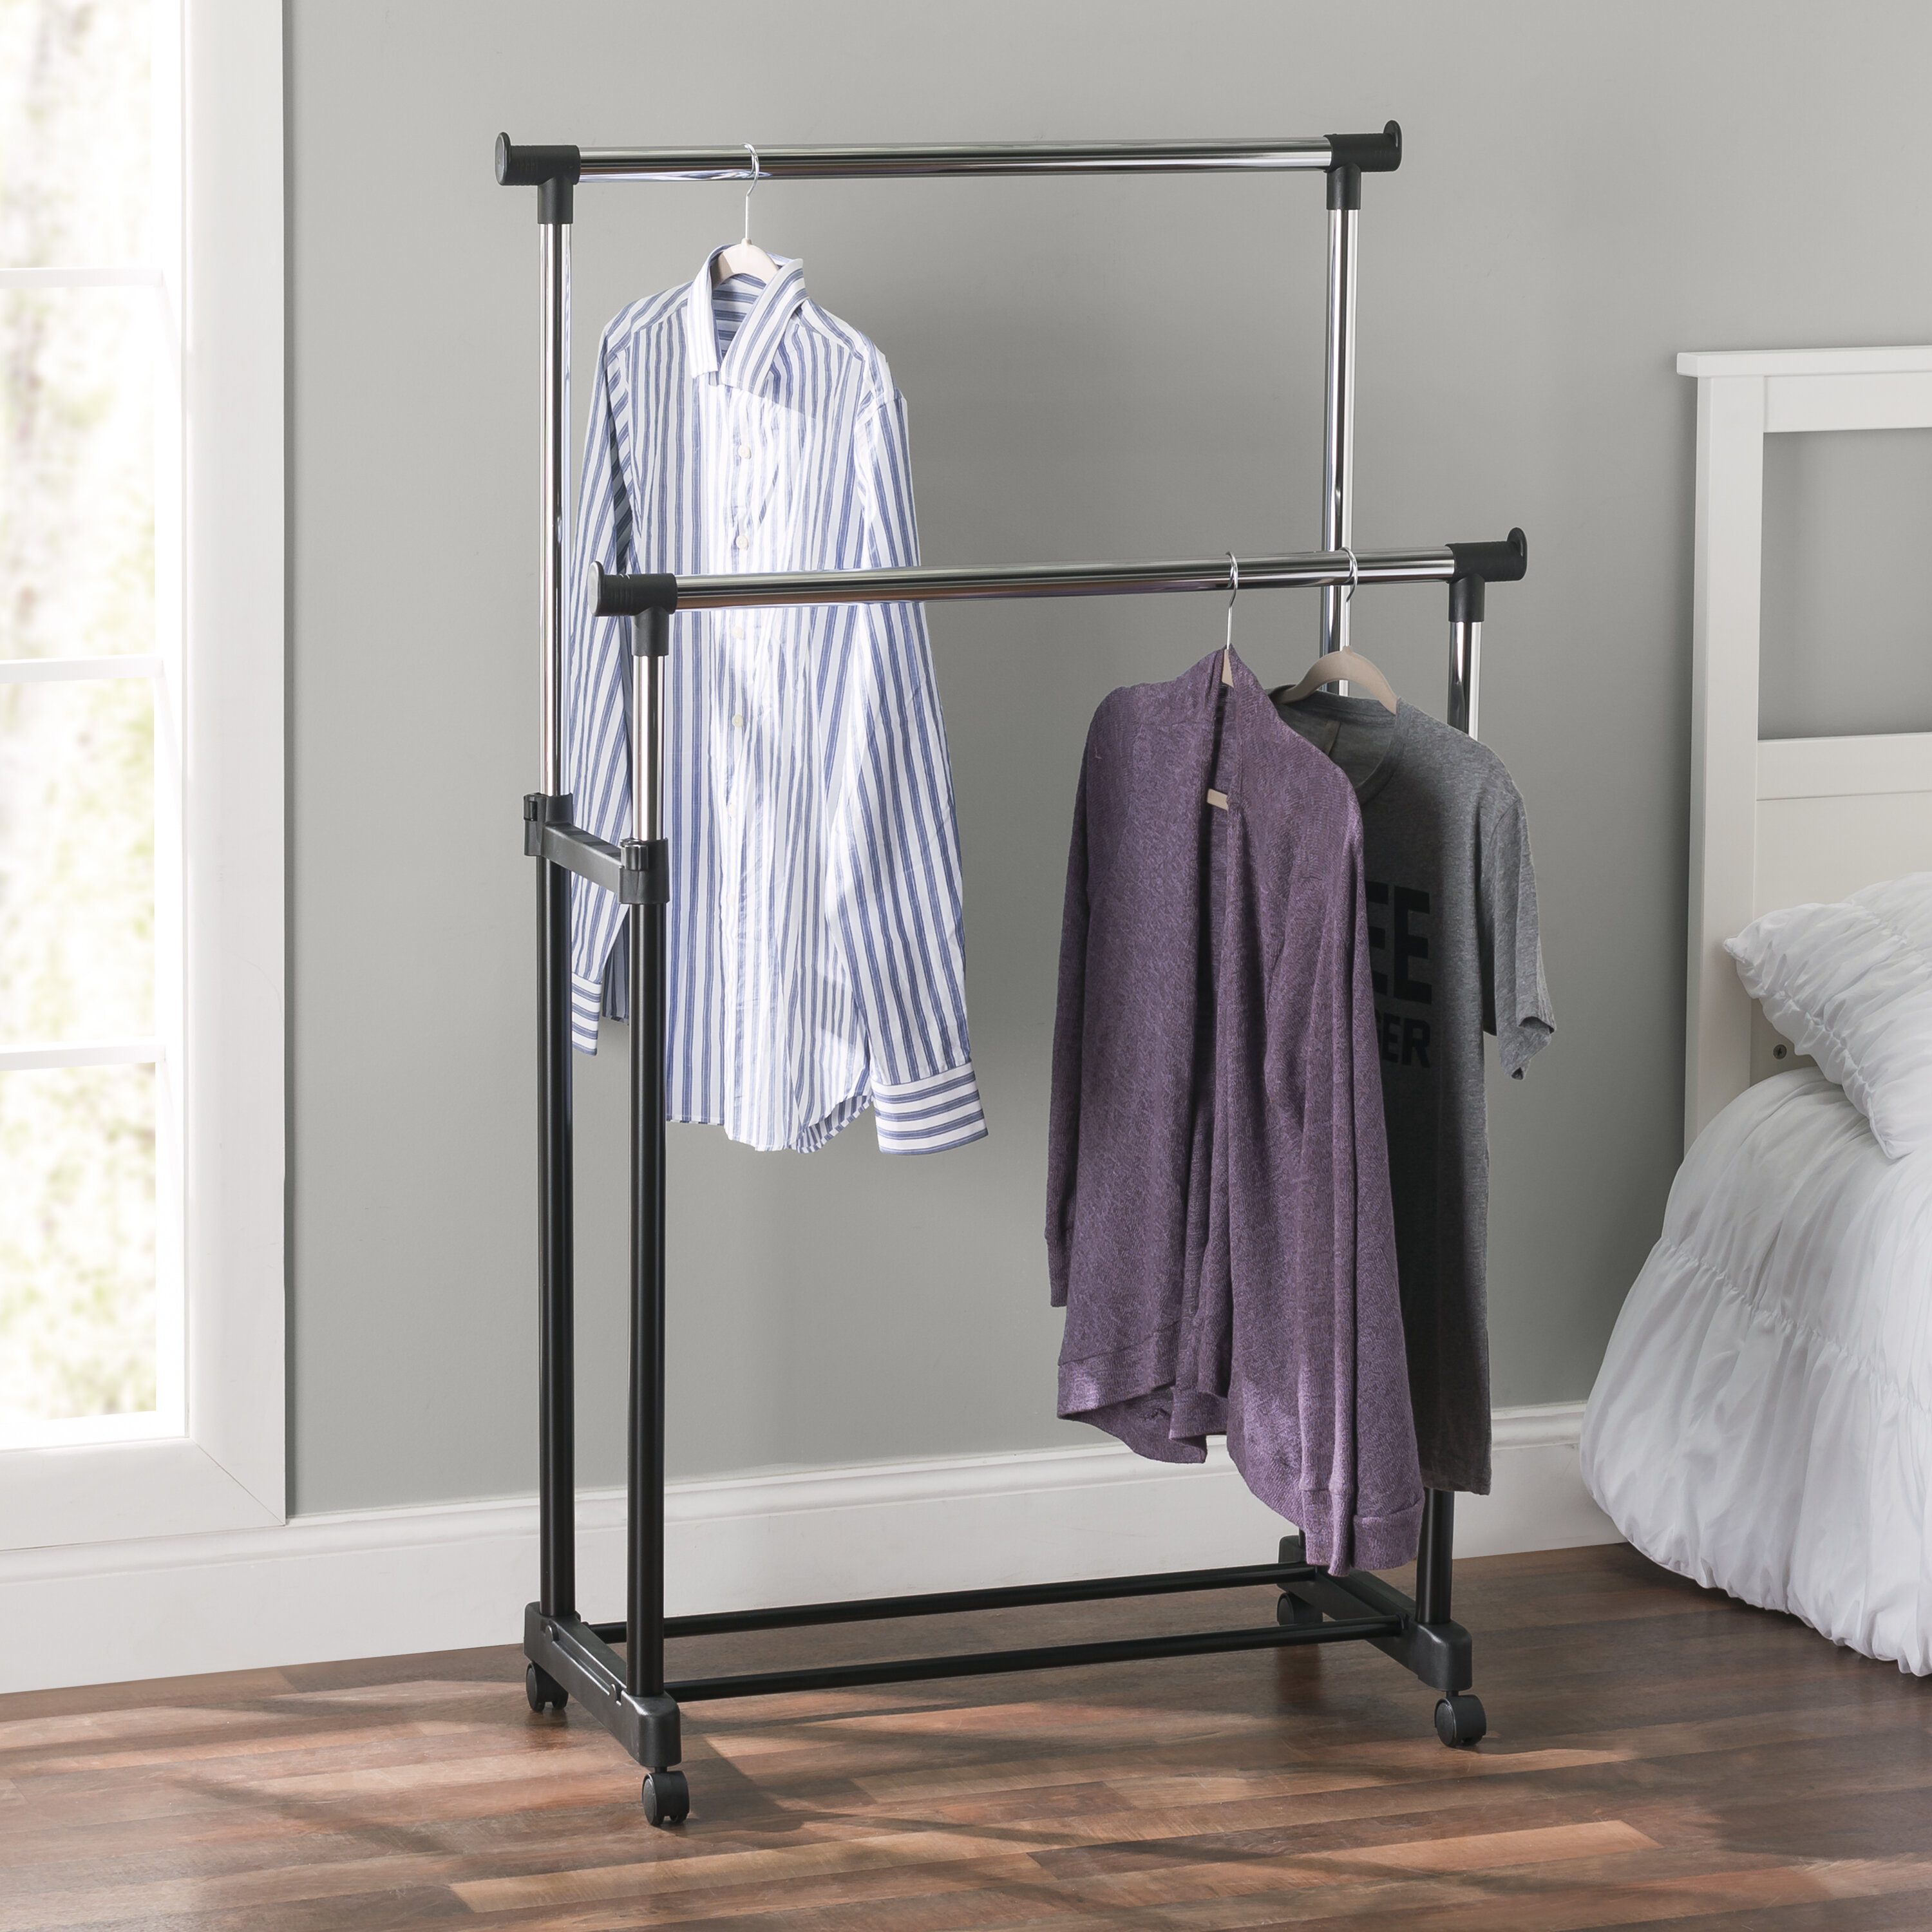 Clothes Racks Garment Wardrobes Clothing rack thin clothes rack wardrobe shop display garment rack durable quick and easy assembly industrial wardrobe. wayfair com